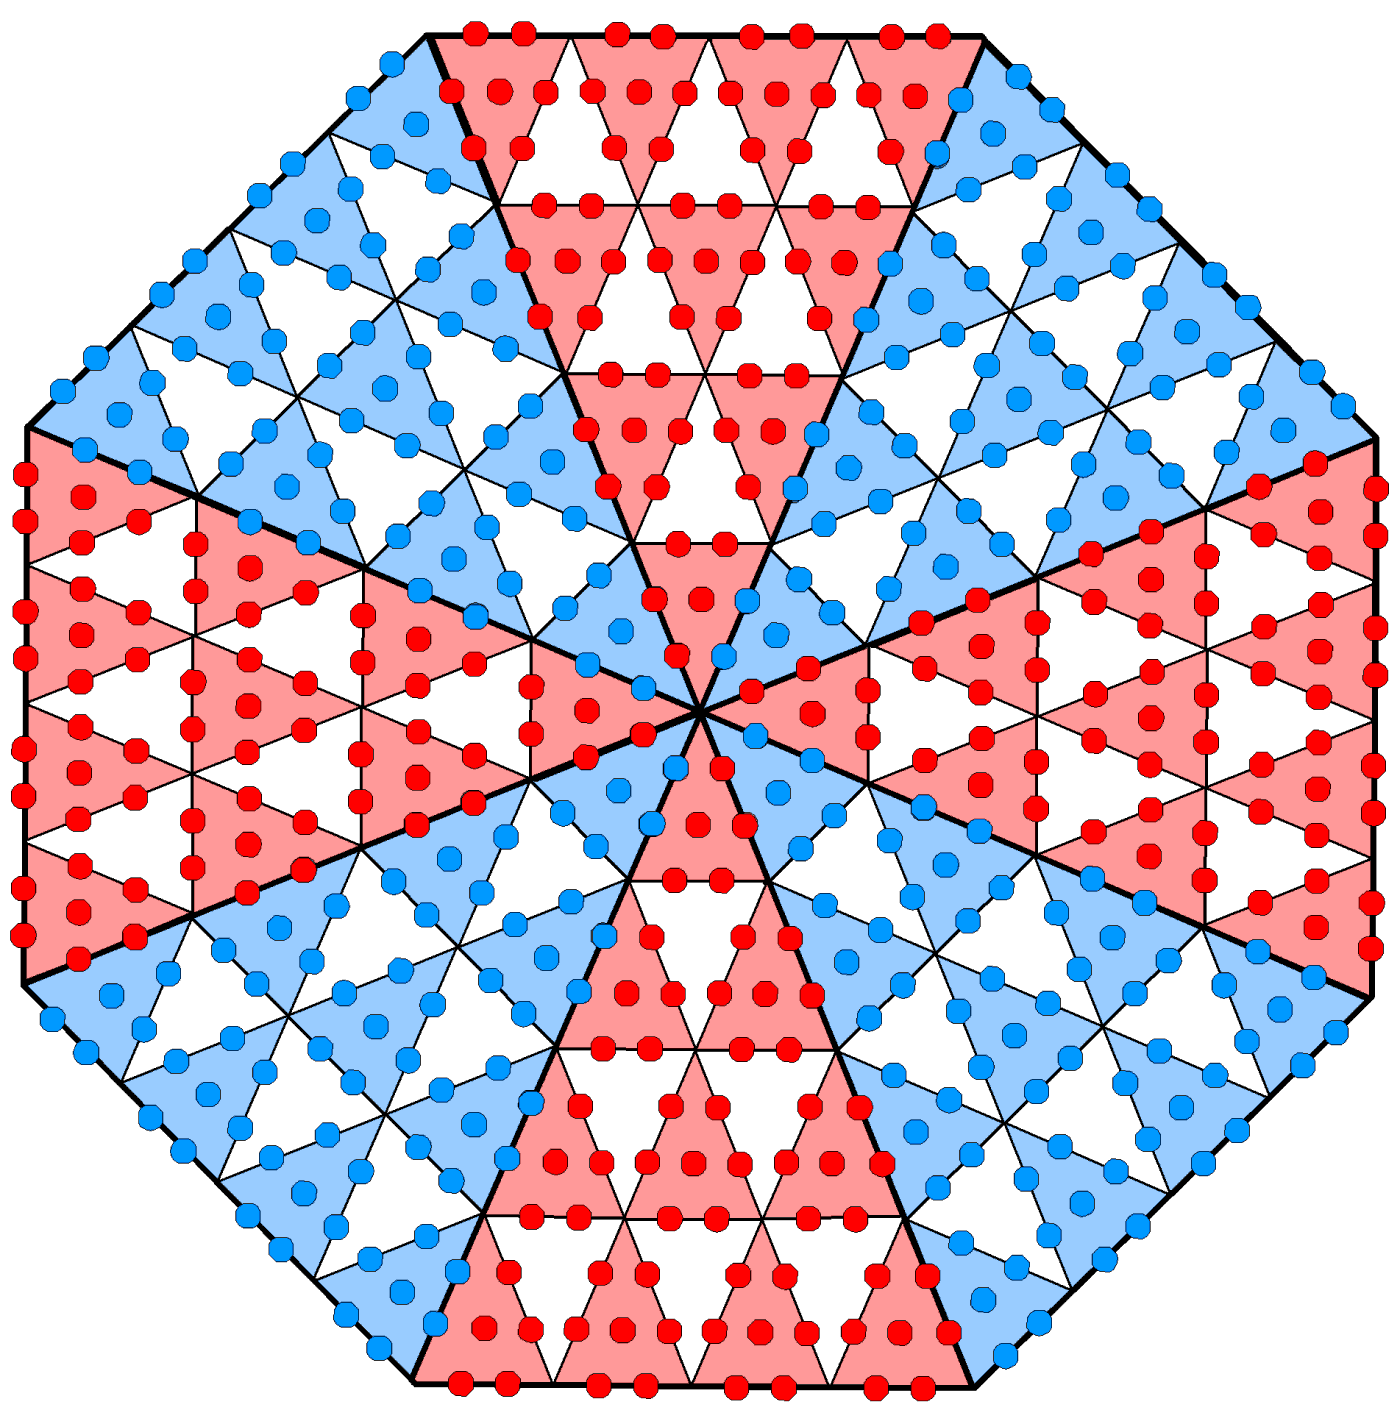 248+248 hexagonal yods in octagon with 2nd-order tetractys sectors